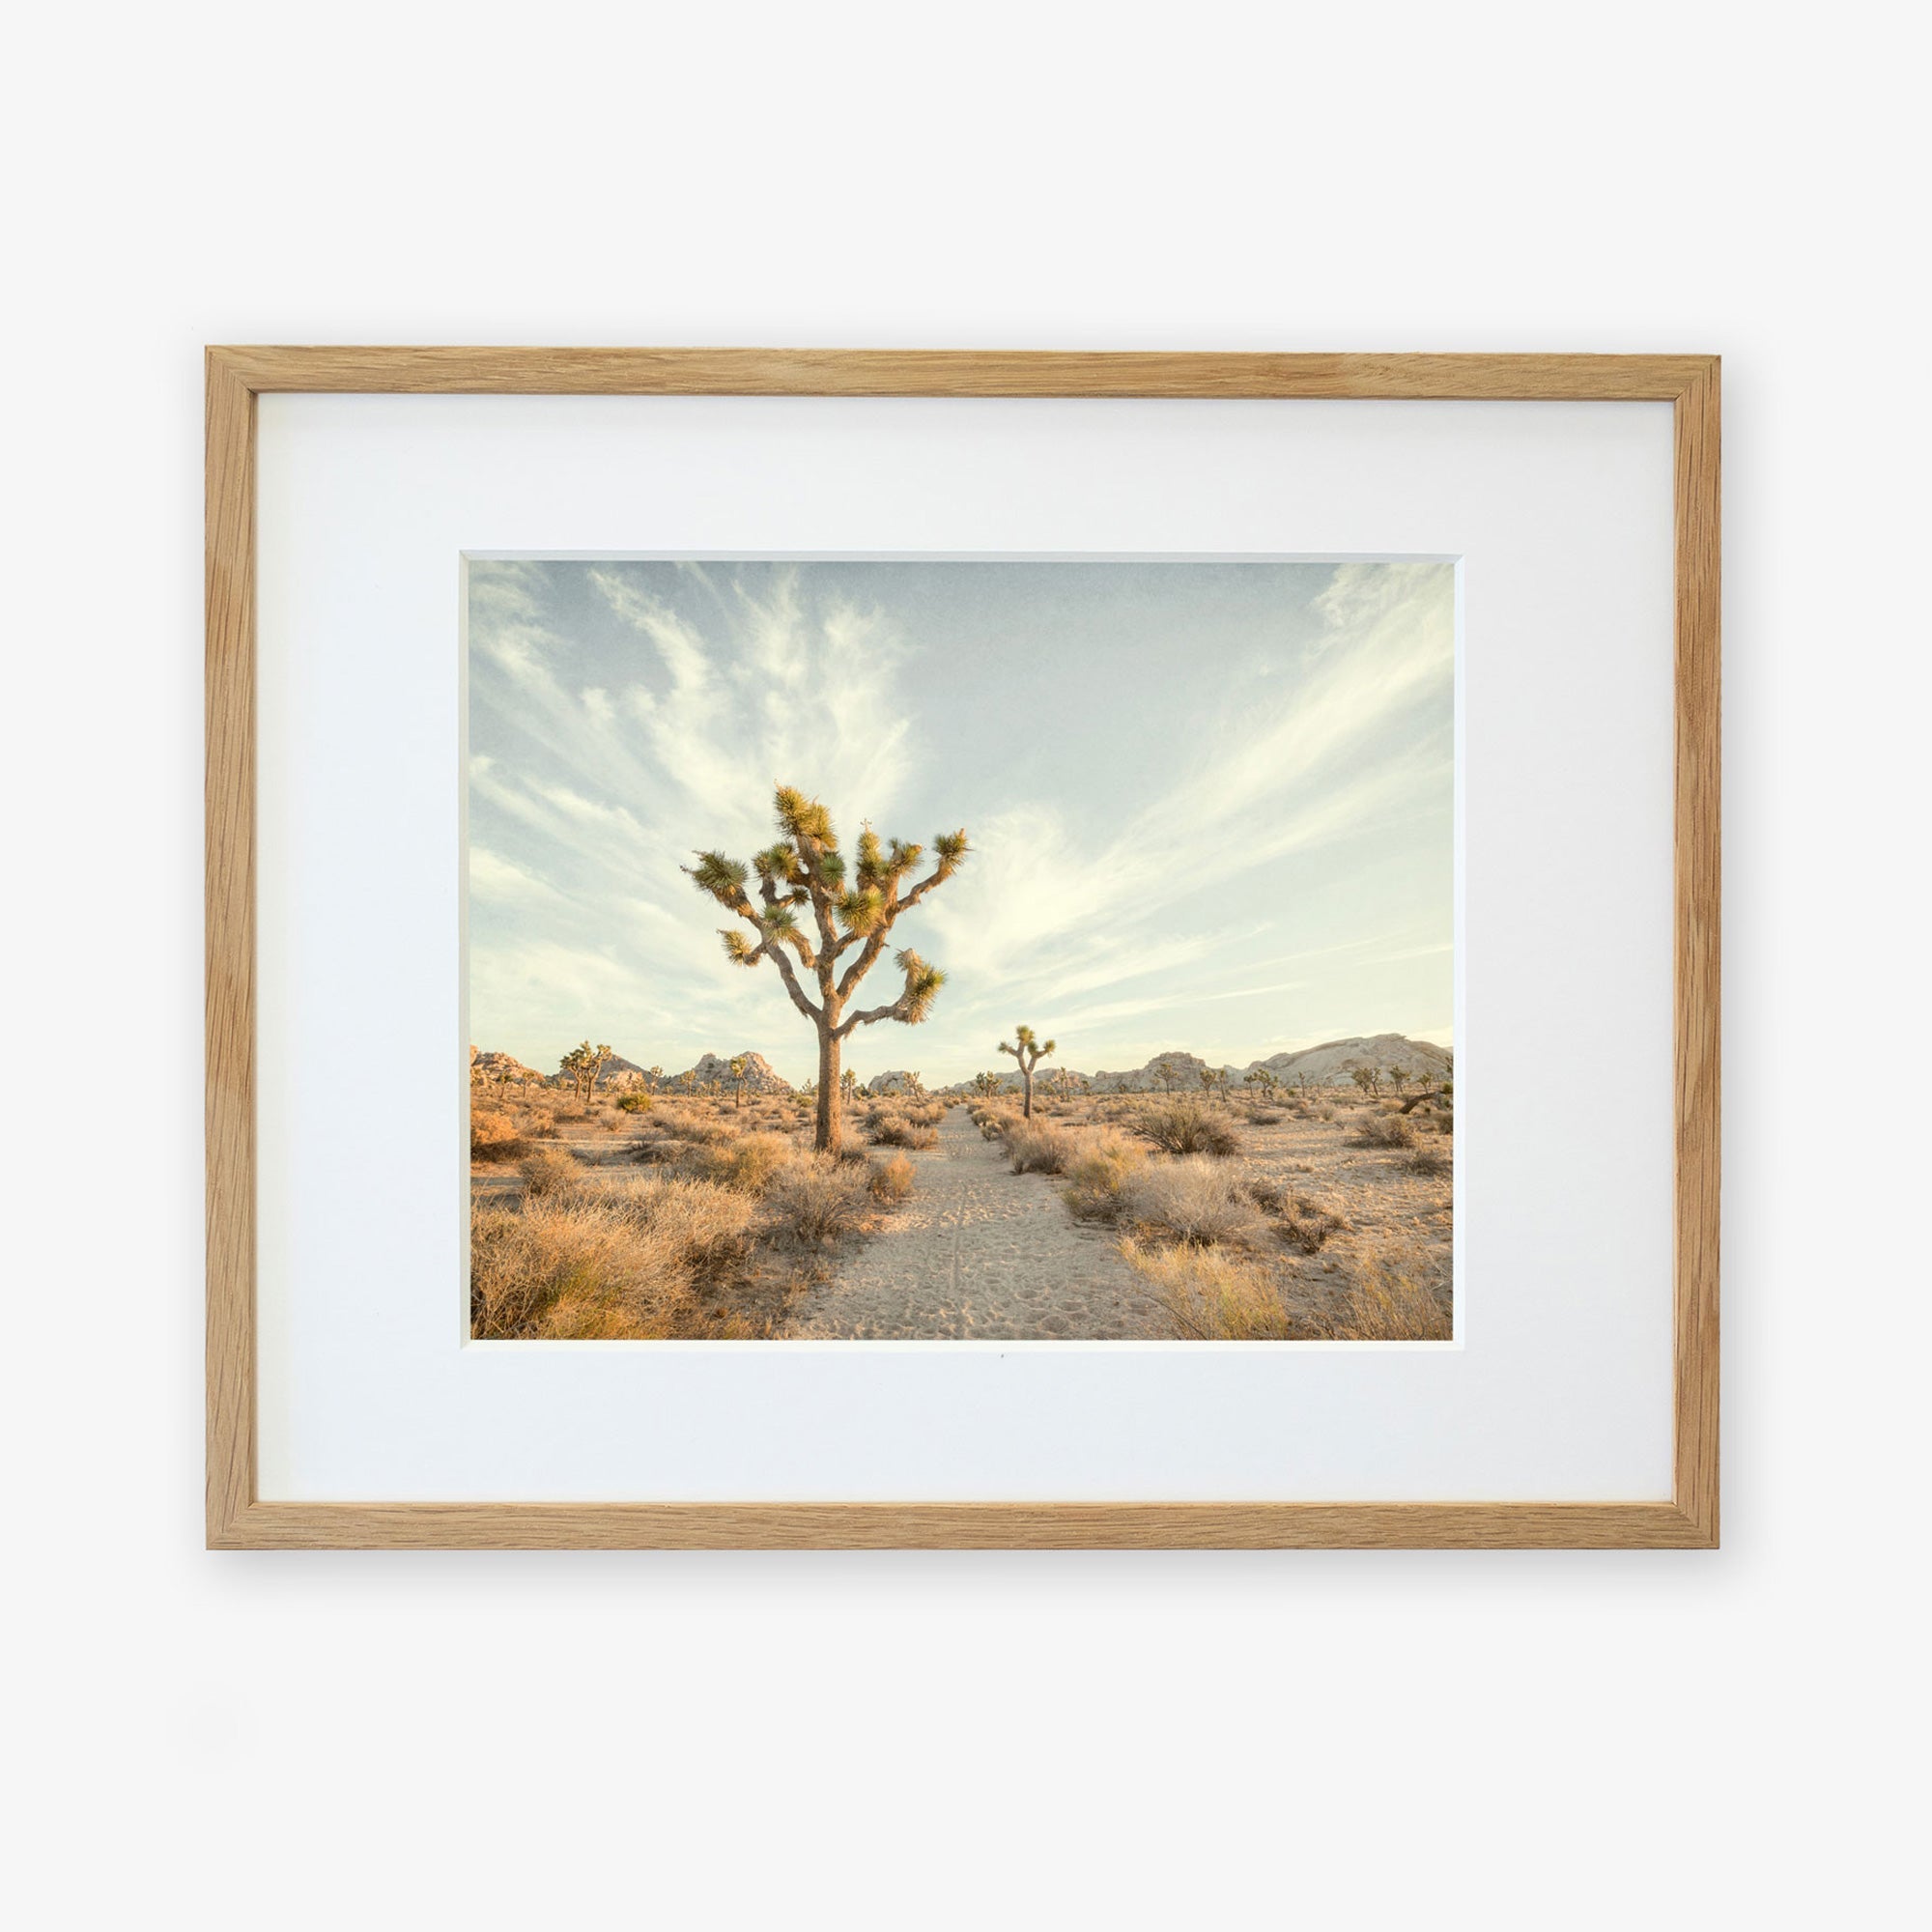 A framed photograph on archival photographic paper of a desert landscape featuring a Joshua Tree Print, &#39;Path to Joshua&#39; in the foreground, under a clear sky, surrounded by arid terrain with sparse vegetation by Offley Green.